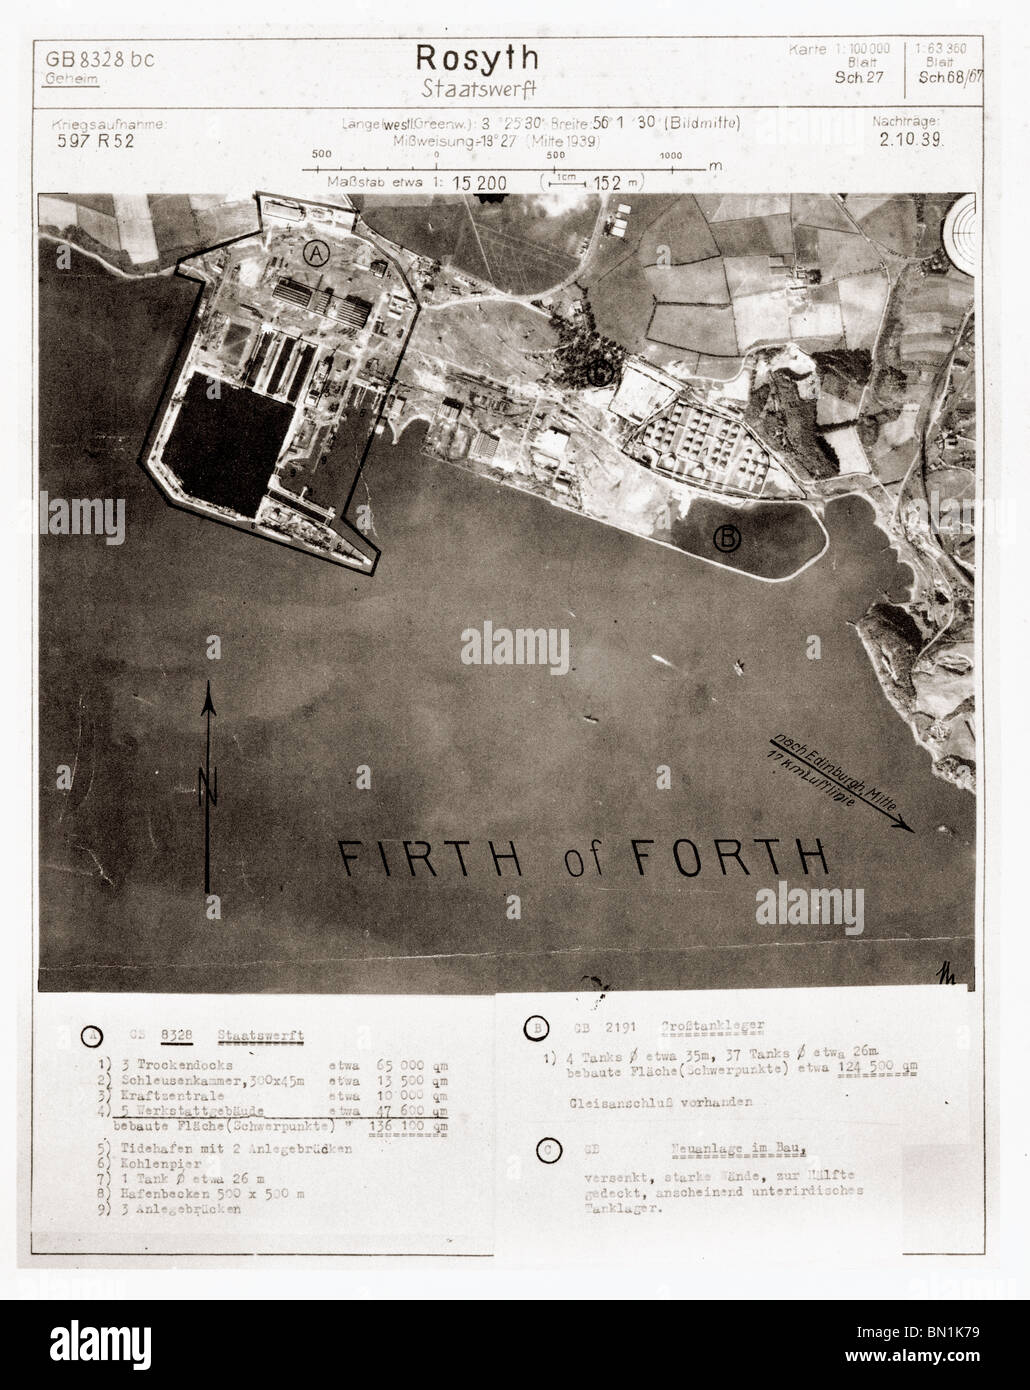 Rosyth, Firth of Forth - Scotland 1940 Naval Base Stock Photo